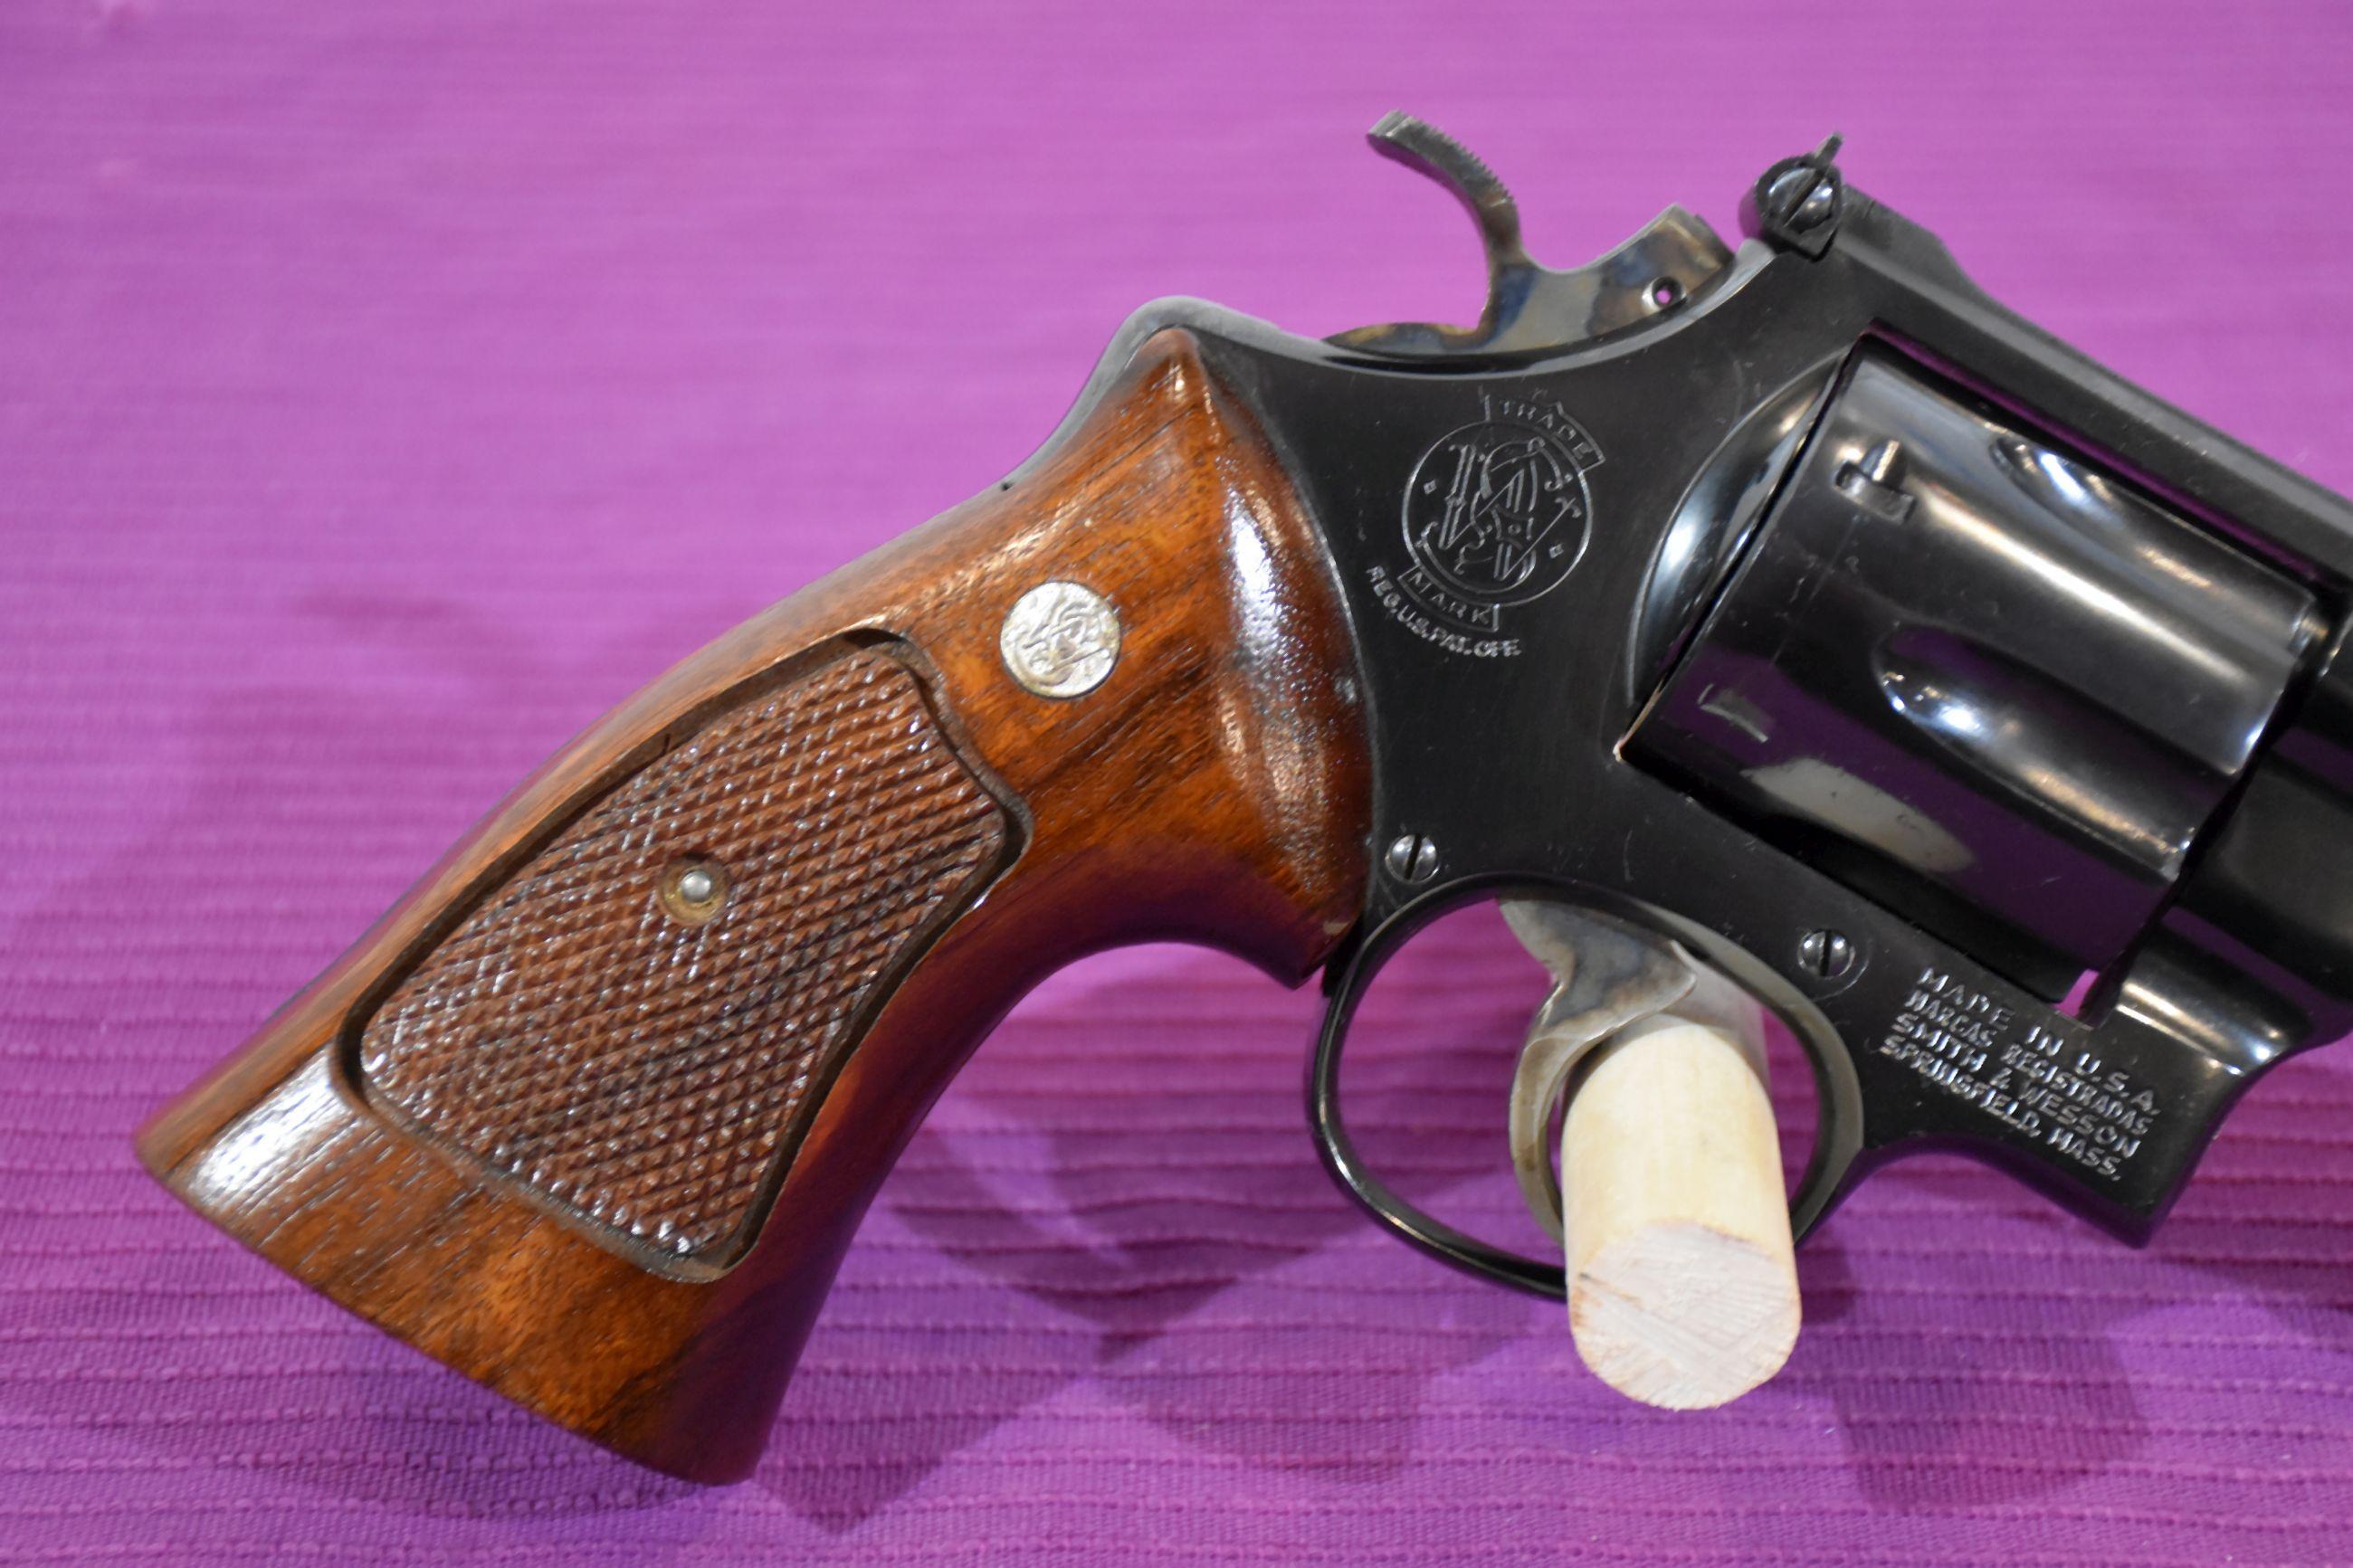 Smith And Wesson Model 29-2 44 Mag Revolver, 6" Barrel, SN: N781207